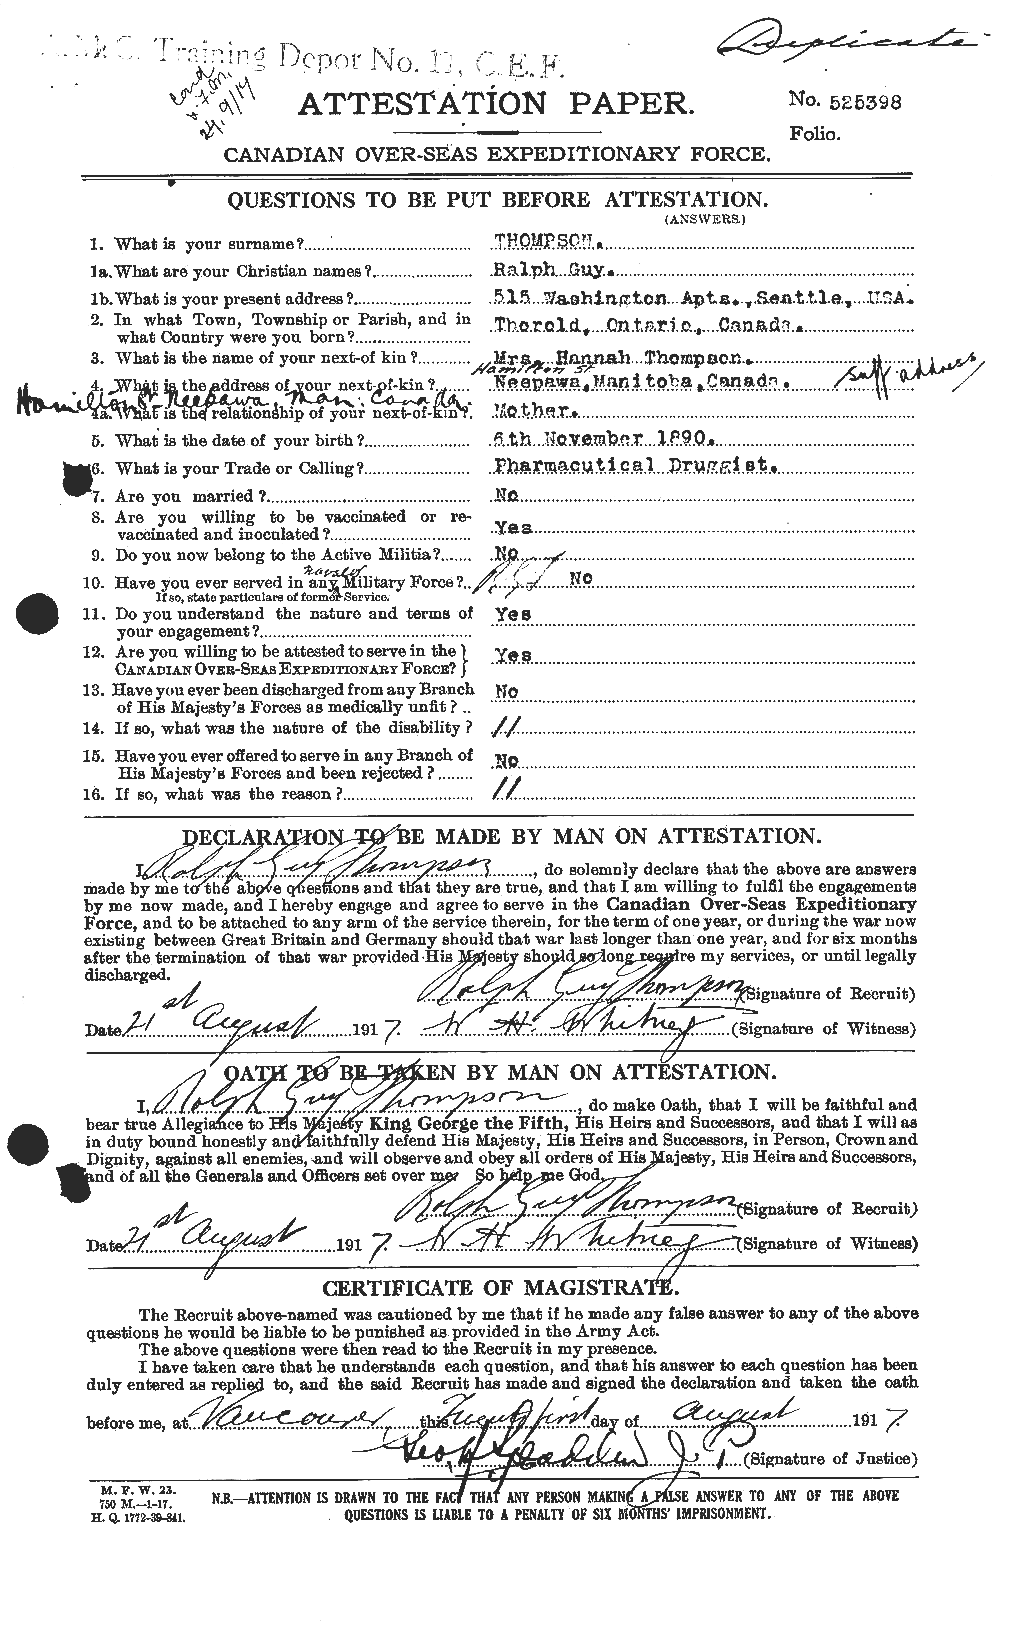 Personnel Records of the First World War - CEF 630818a